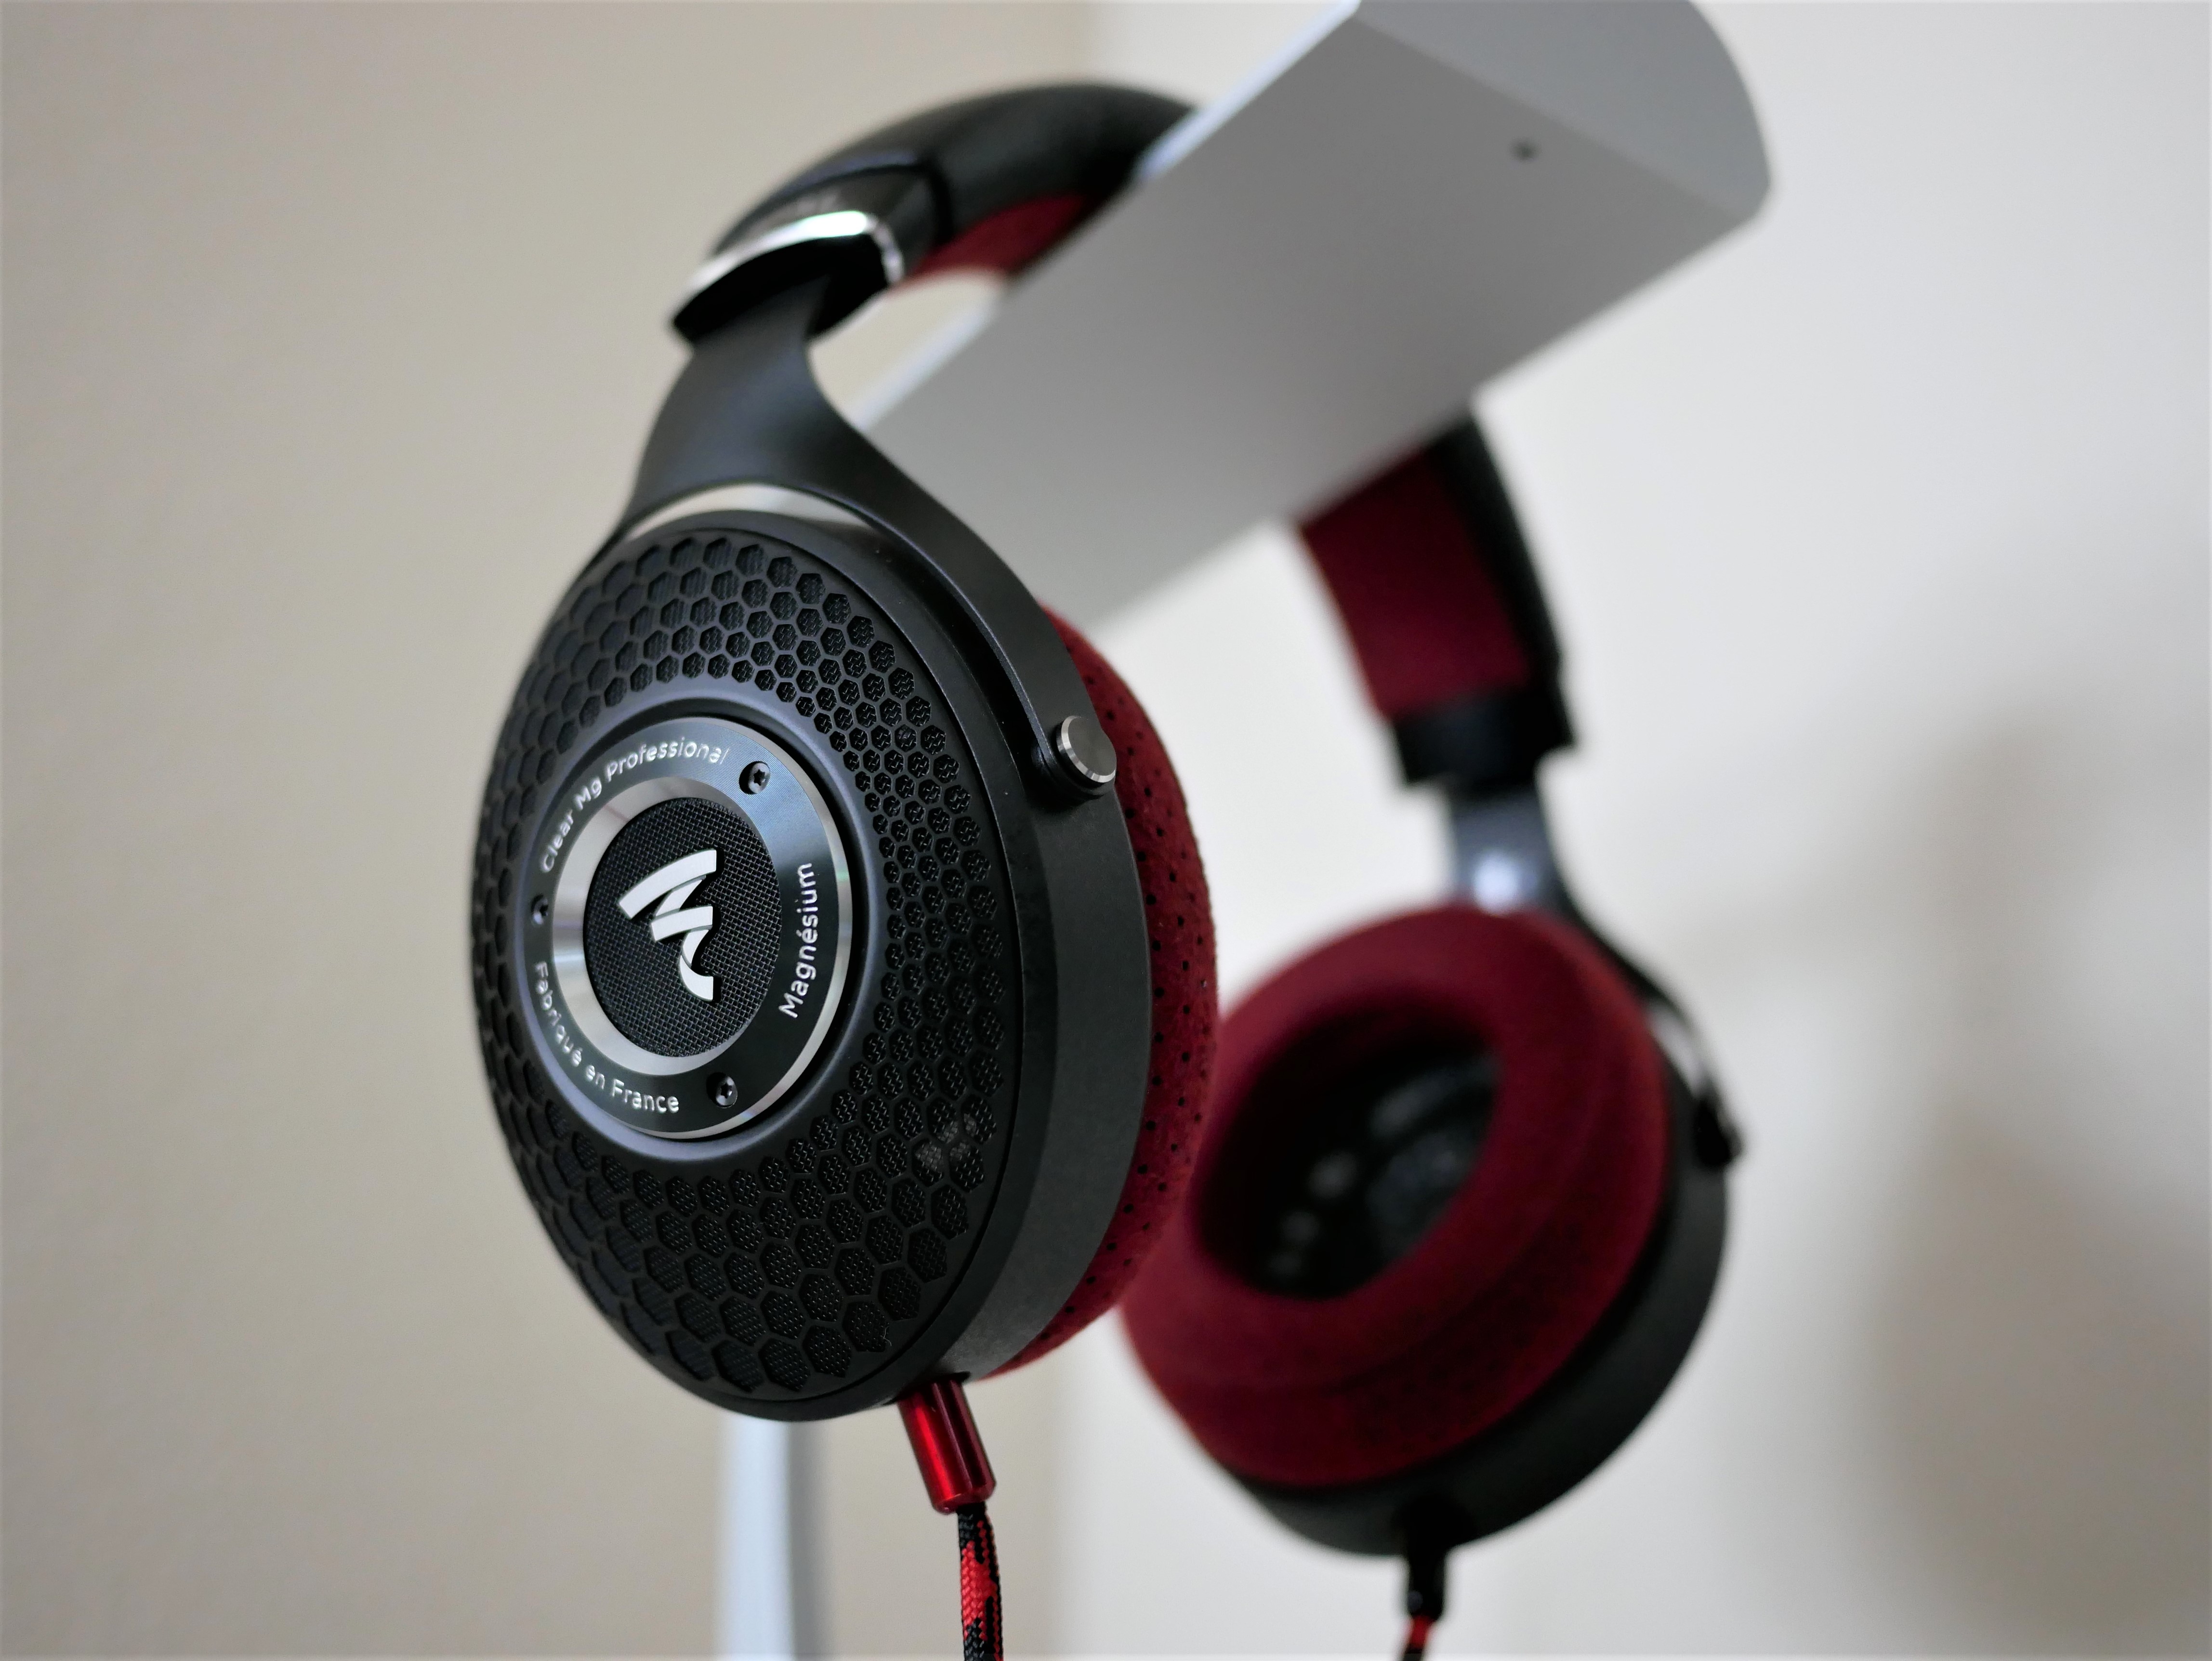 Focal Clear Mg Pro Review